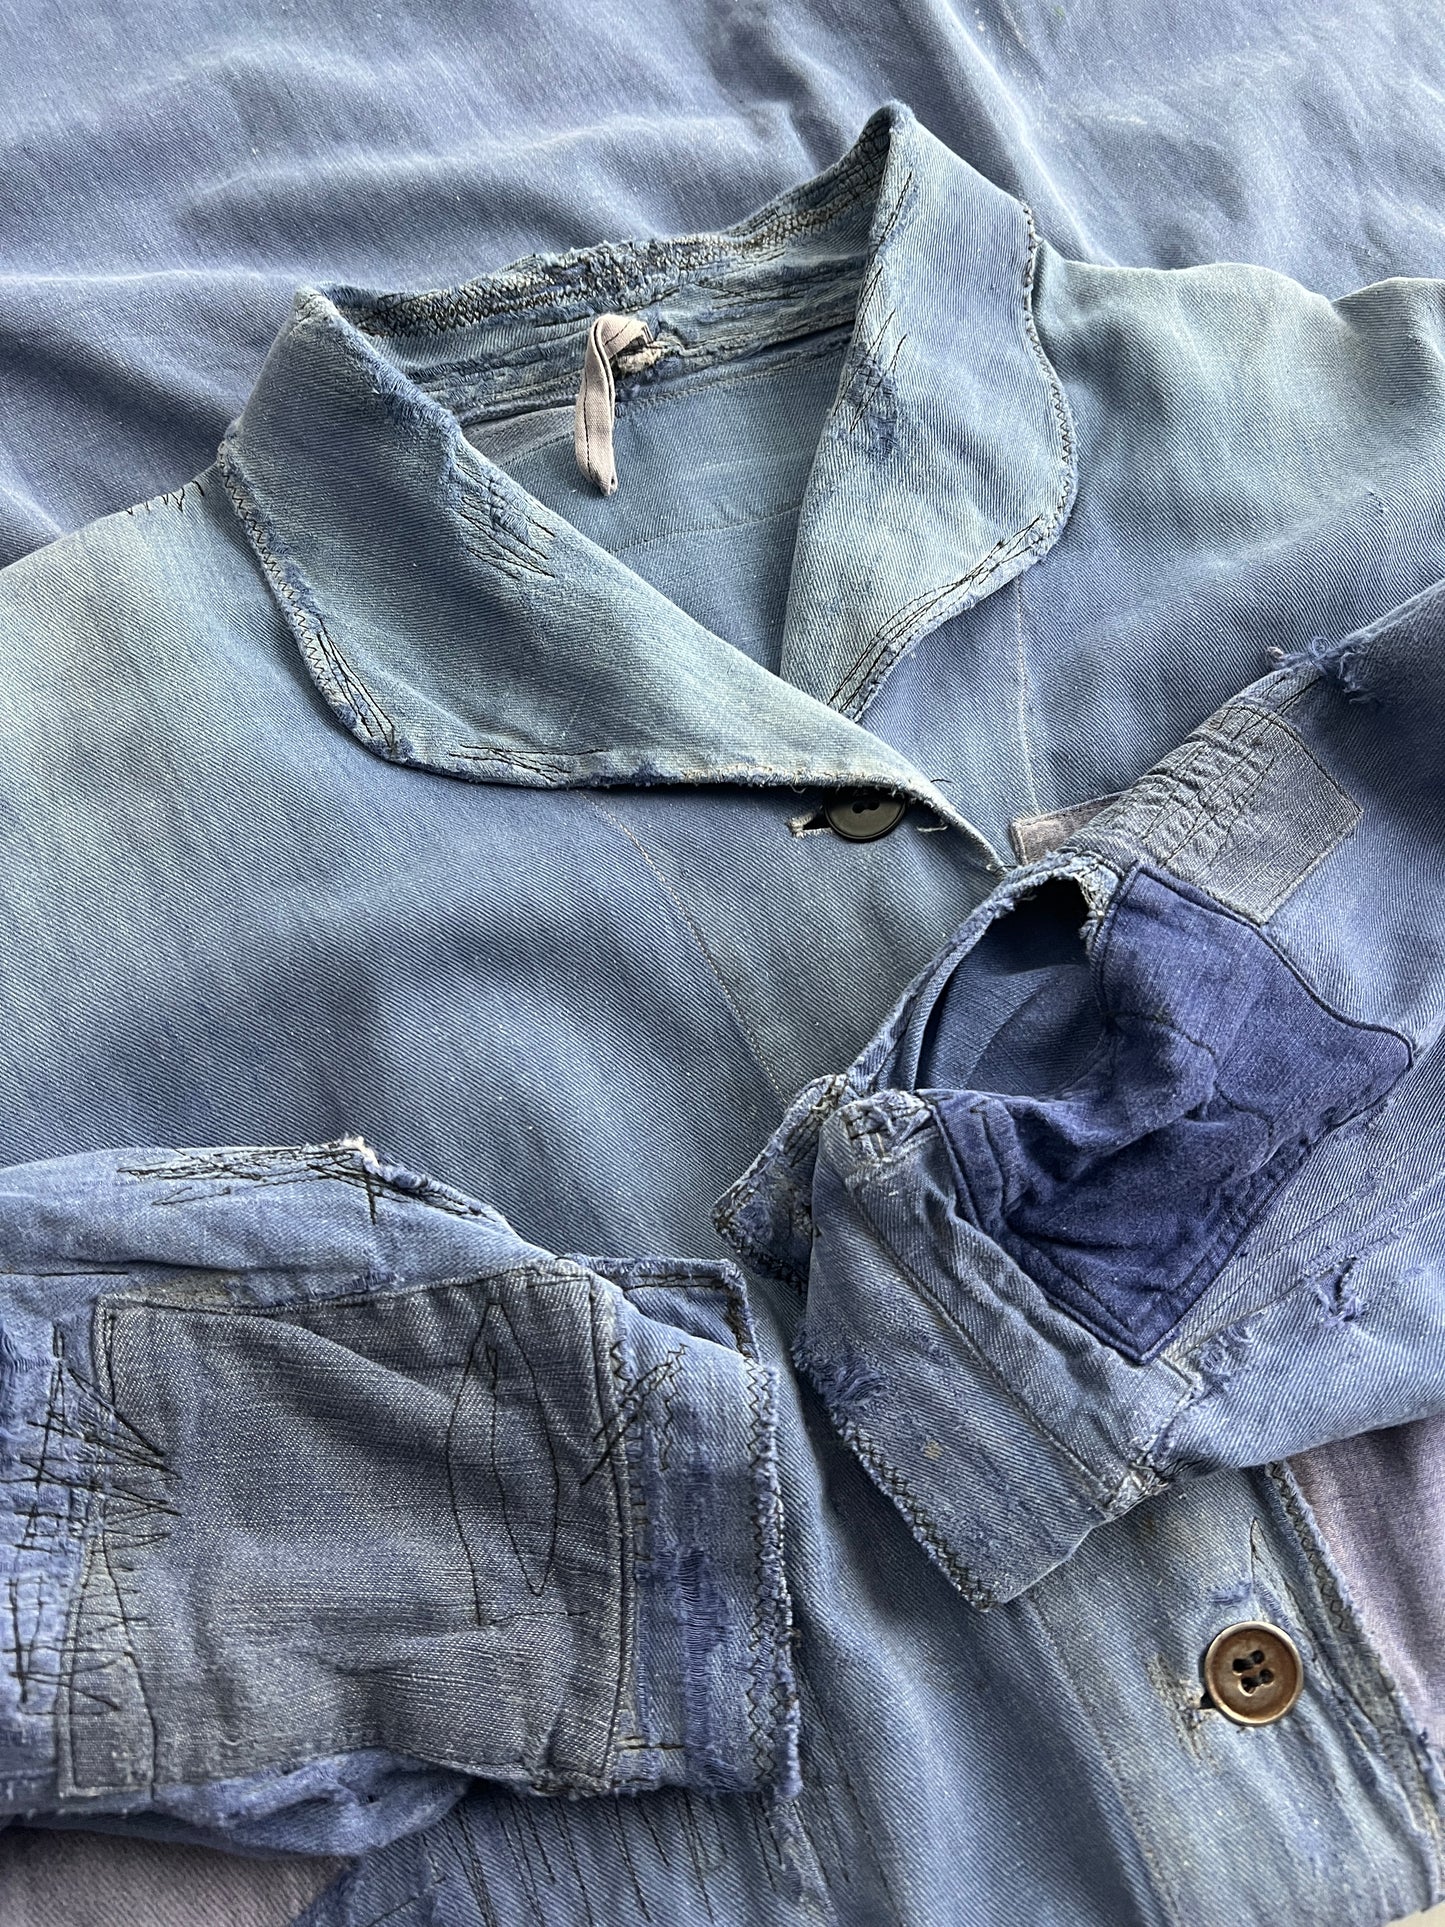 Heavily Repaired French Shop Coat [M]